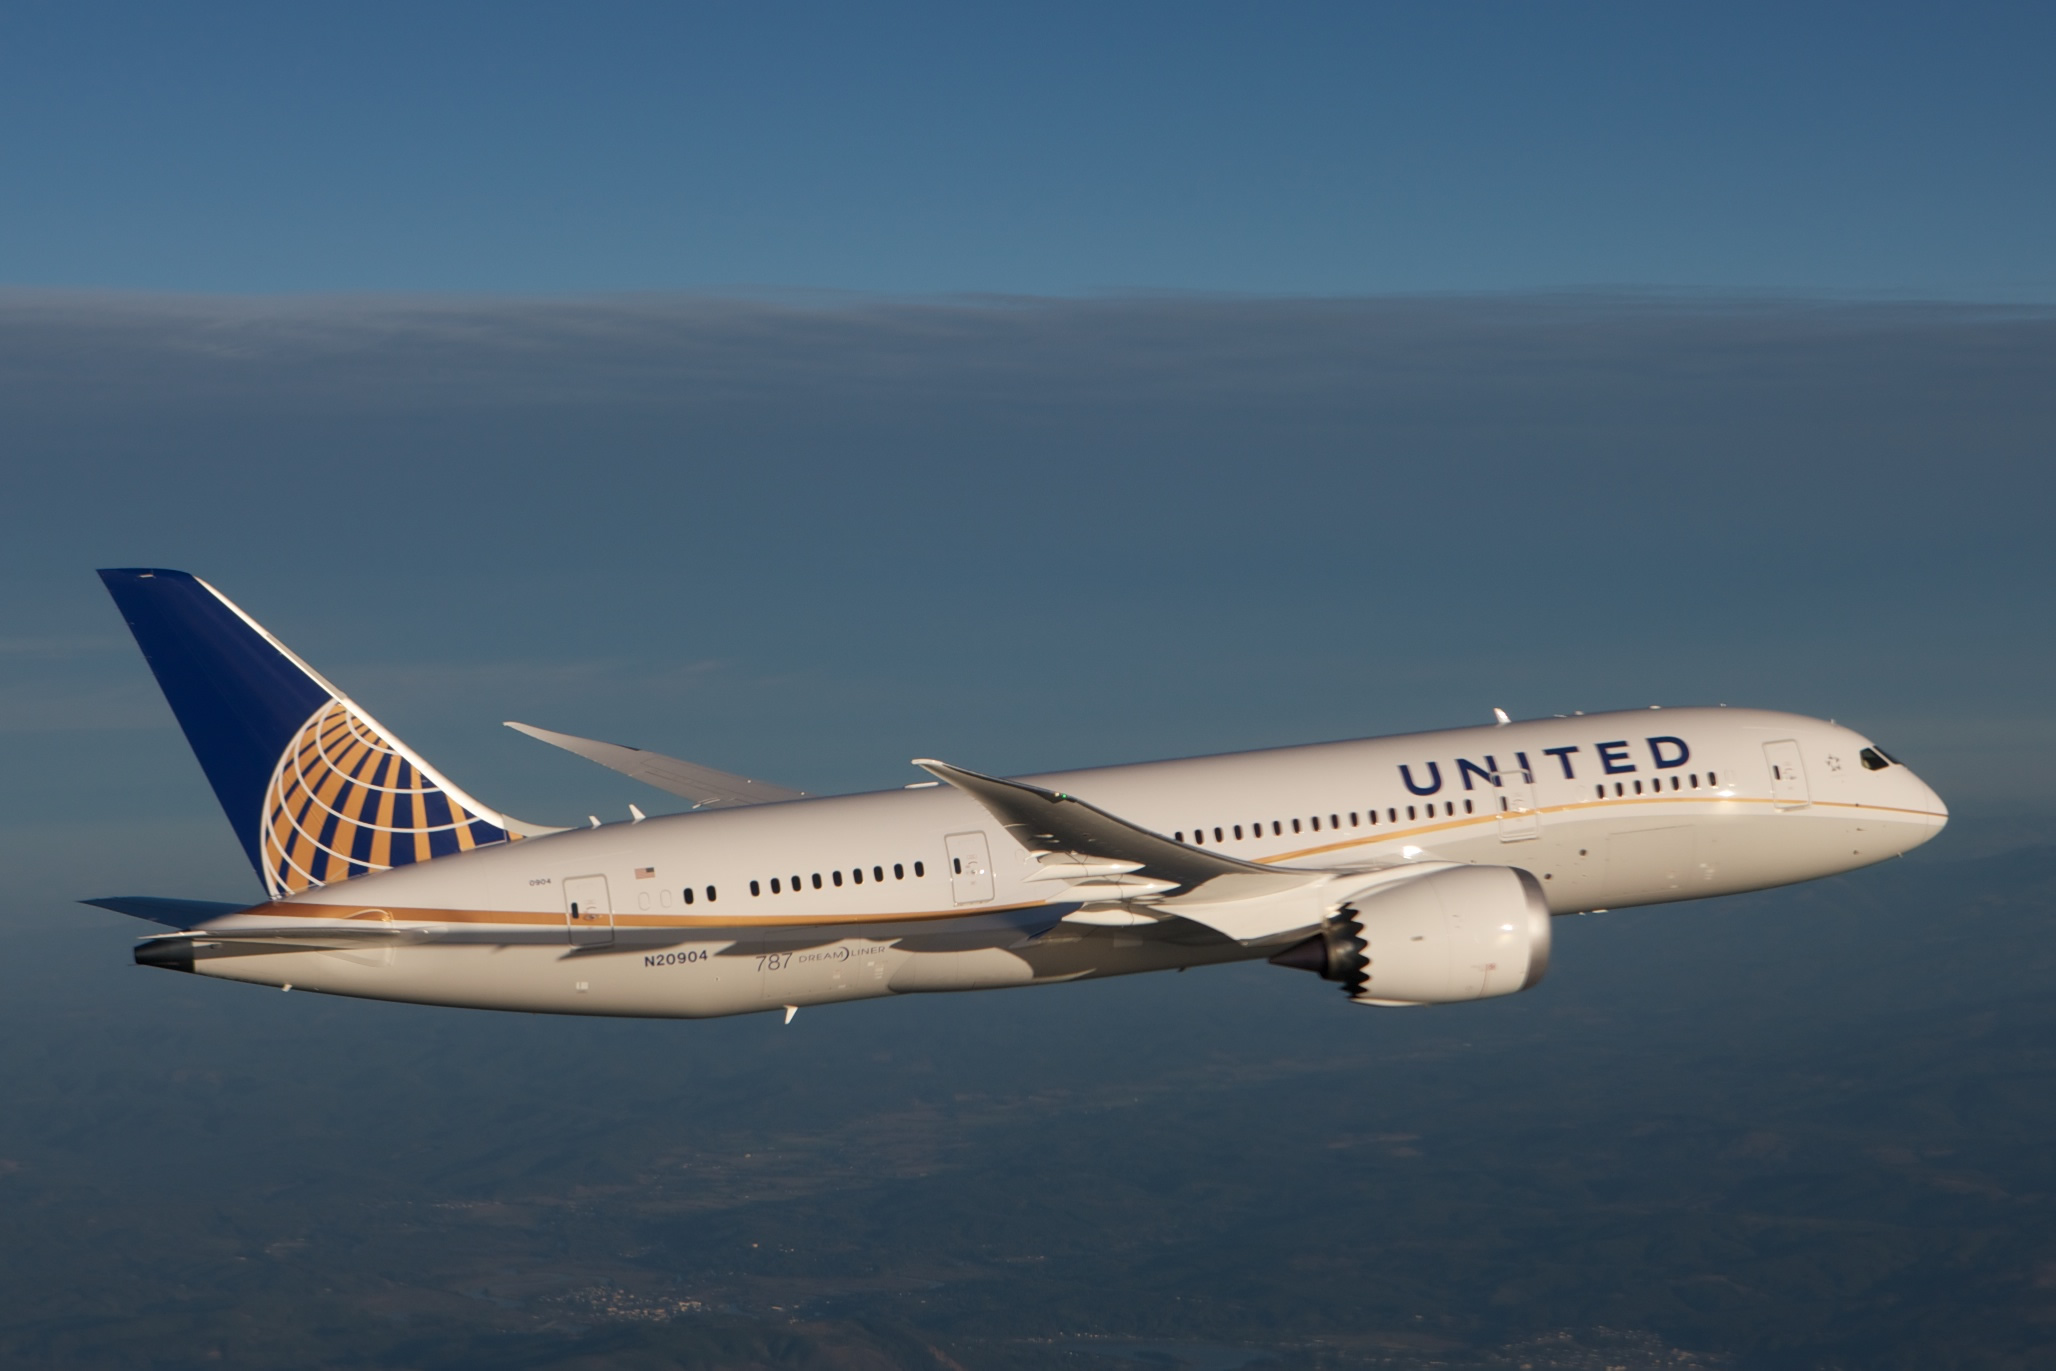 United Airlines is the No.3 U.S. airline by passenger traffic. (Courtesy of United Airlines)